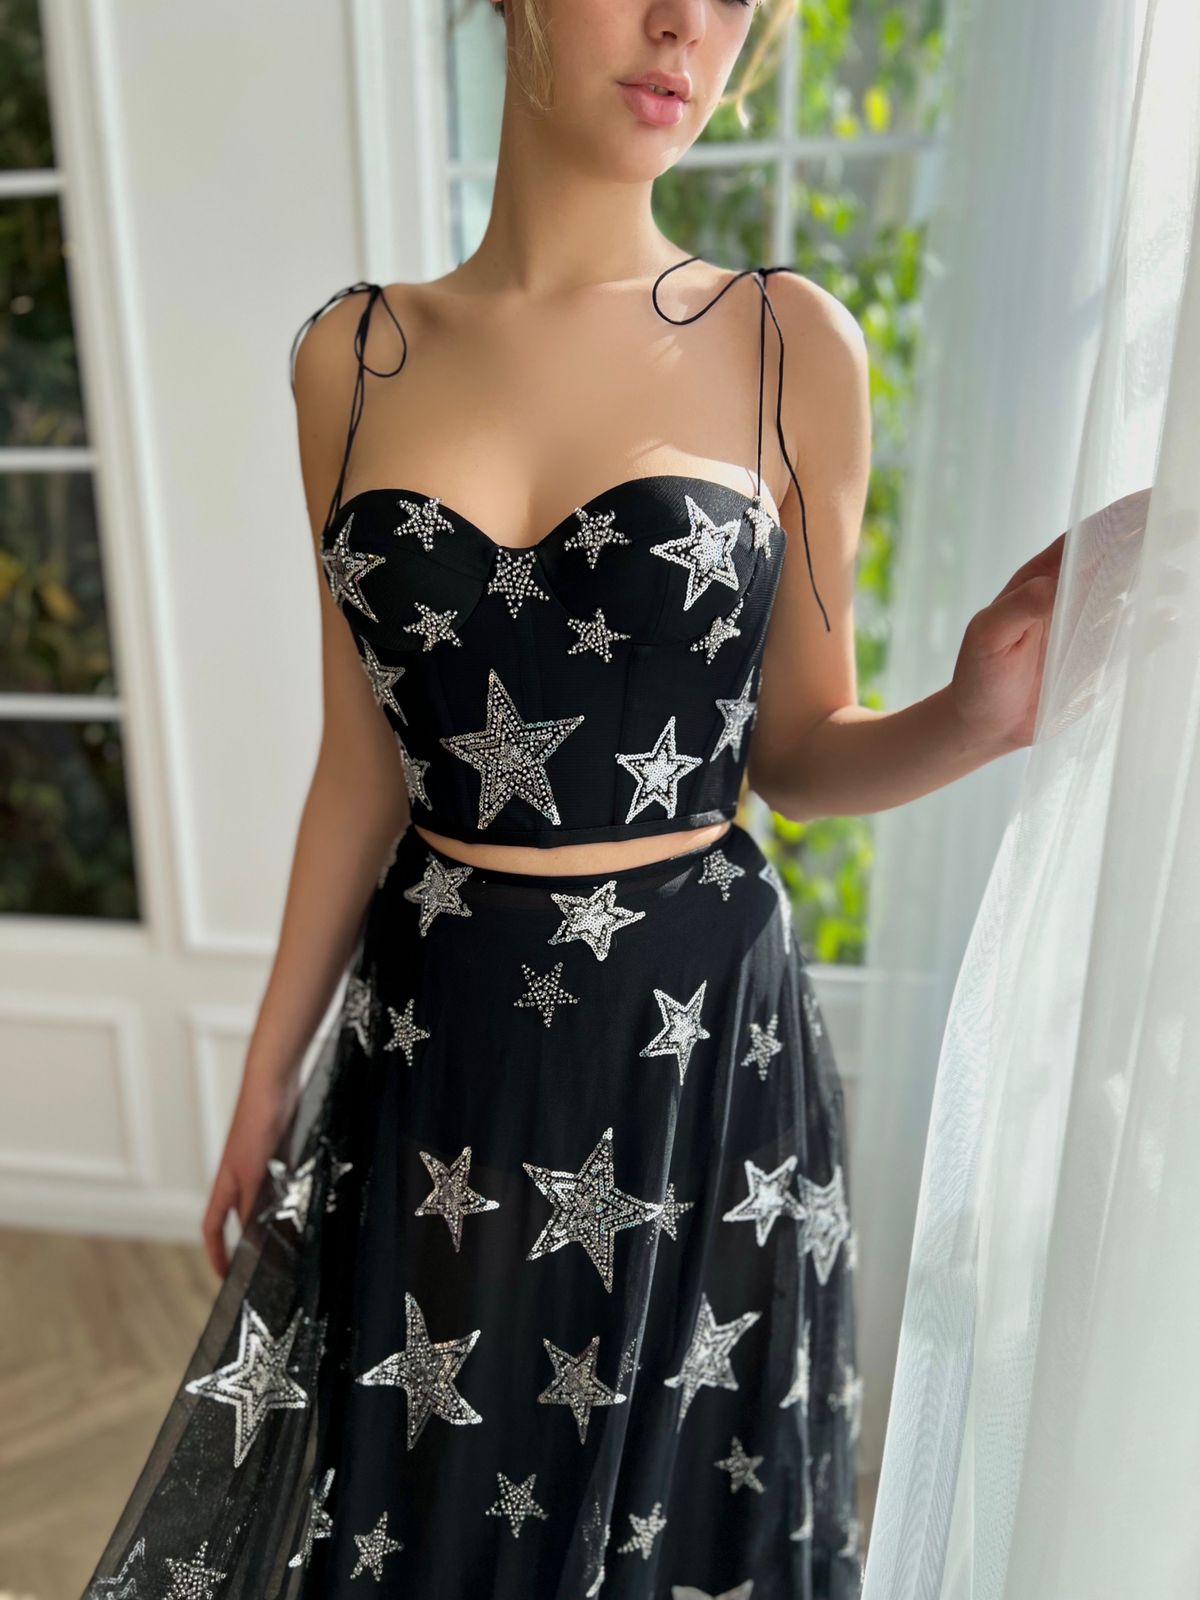 Black two piece dress with spaghetti straps and starry fabric